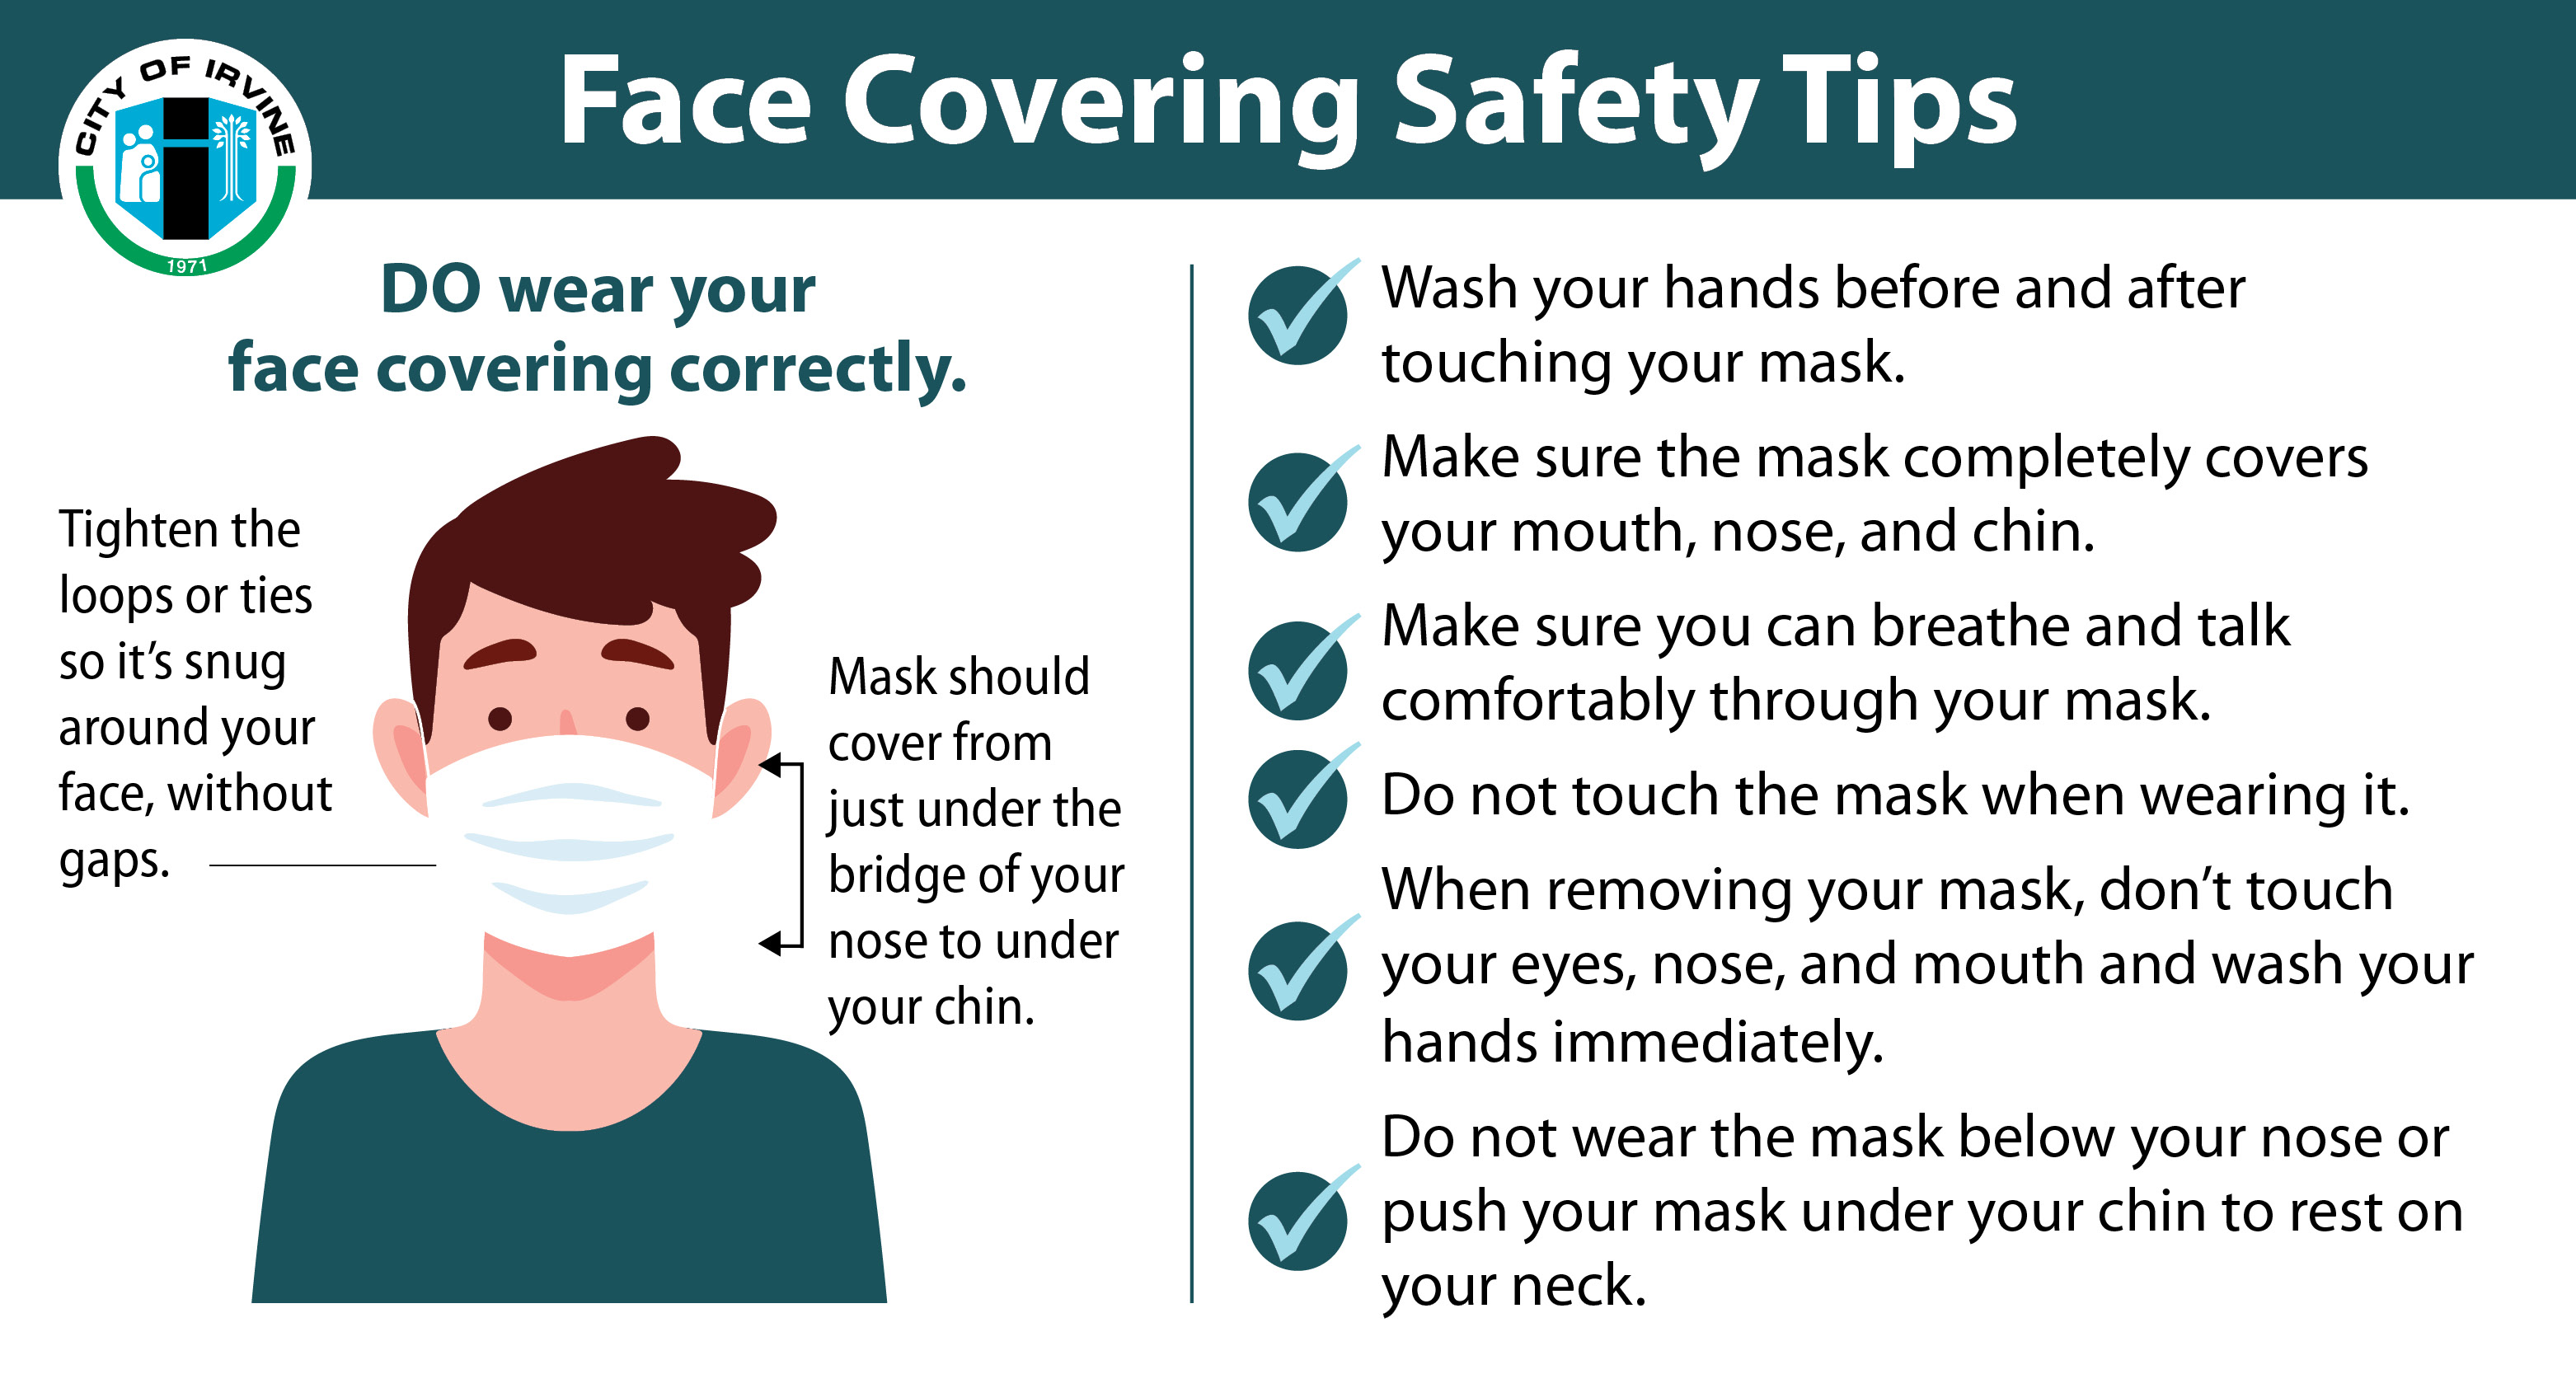 How to Face Coverings | City of Irvine